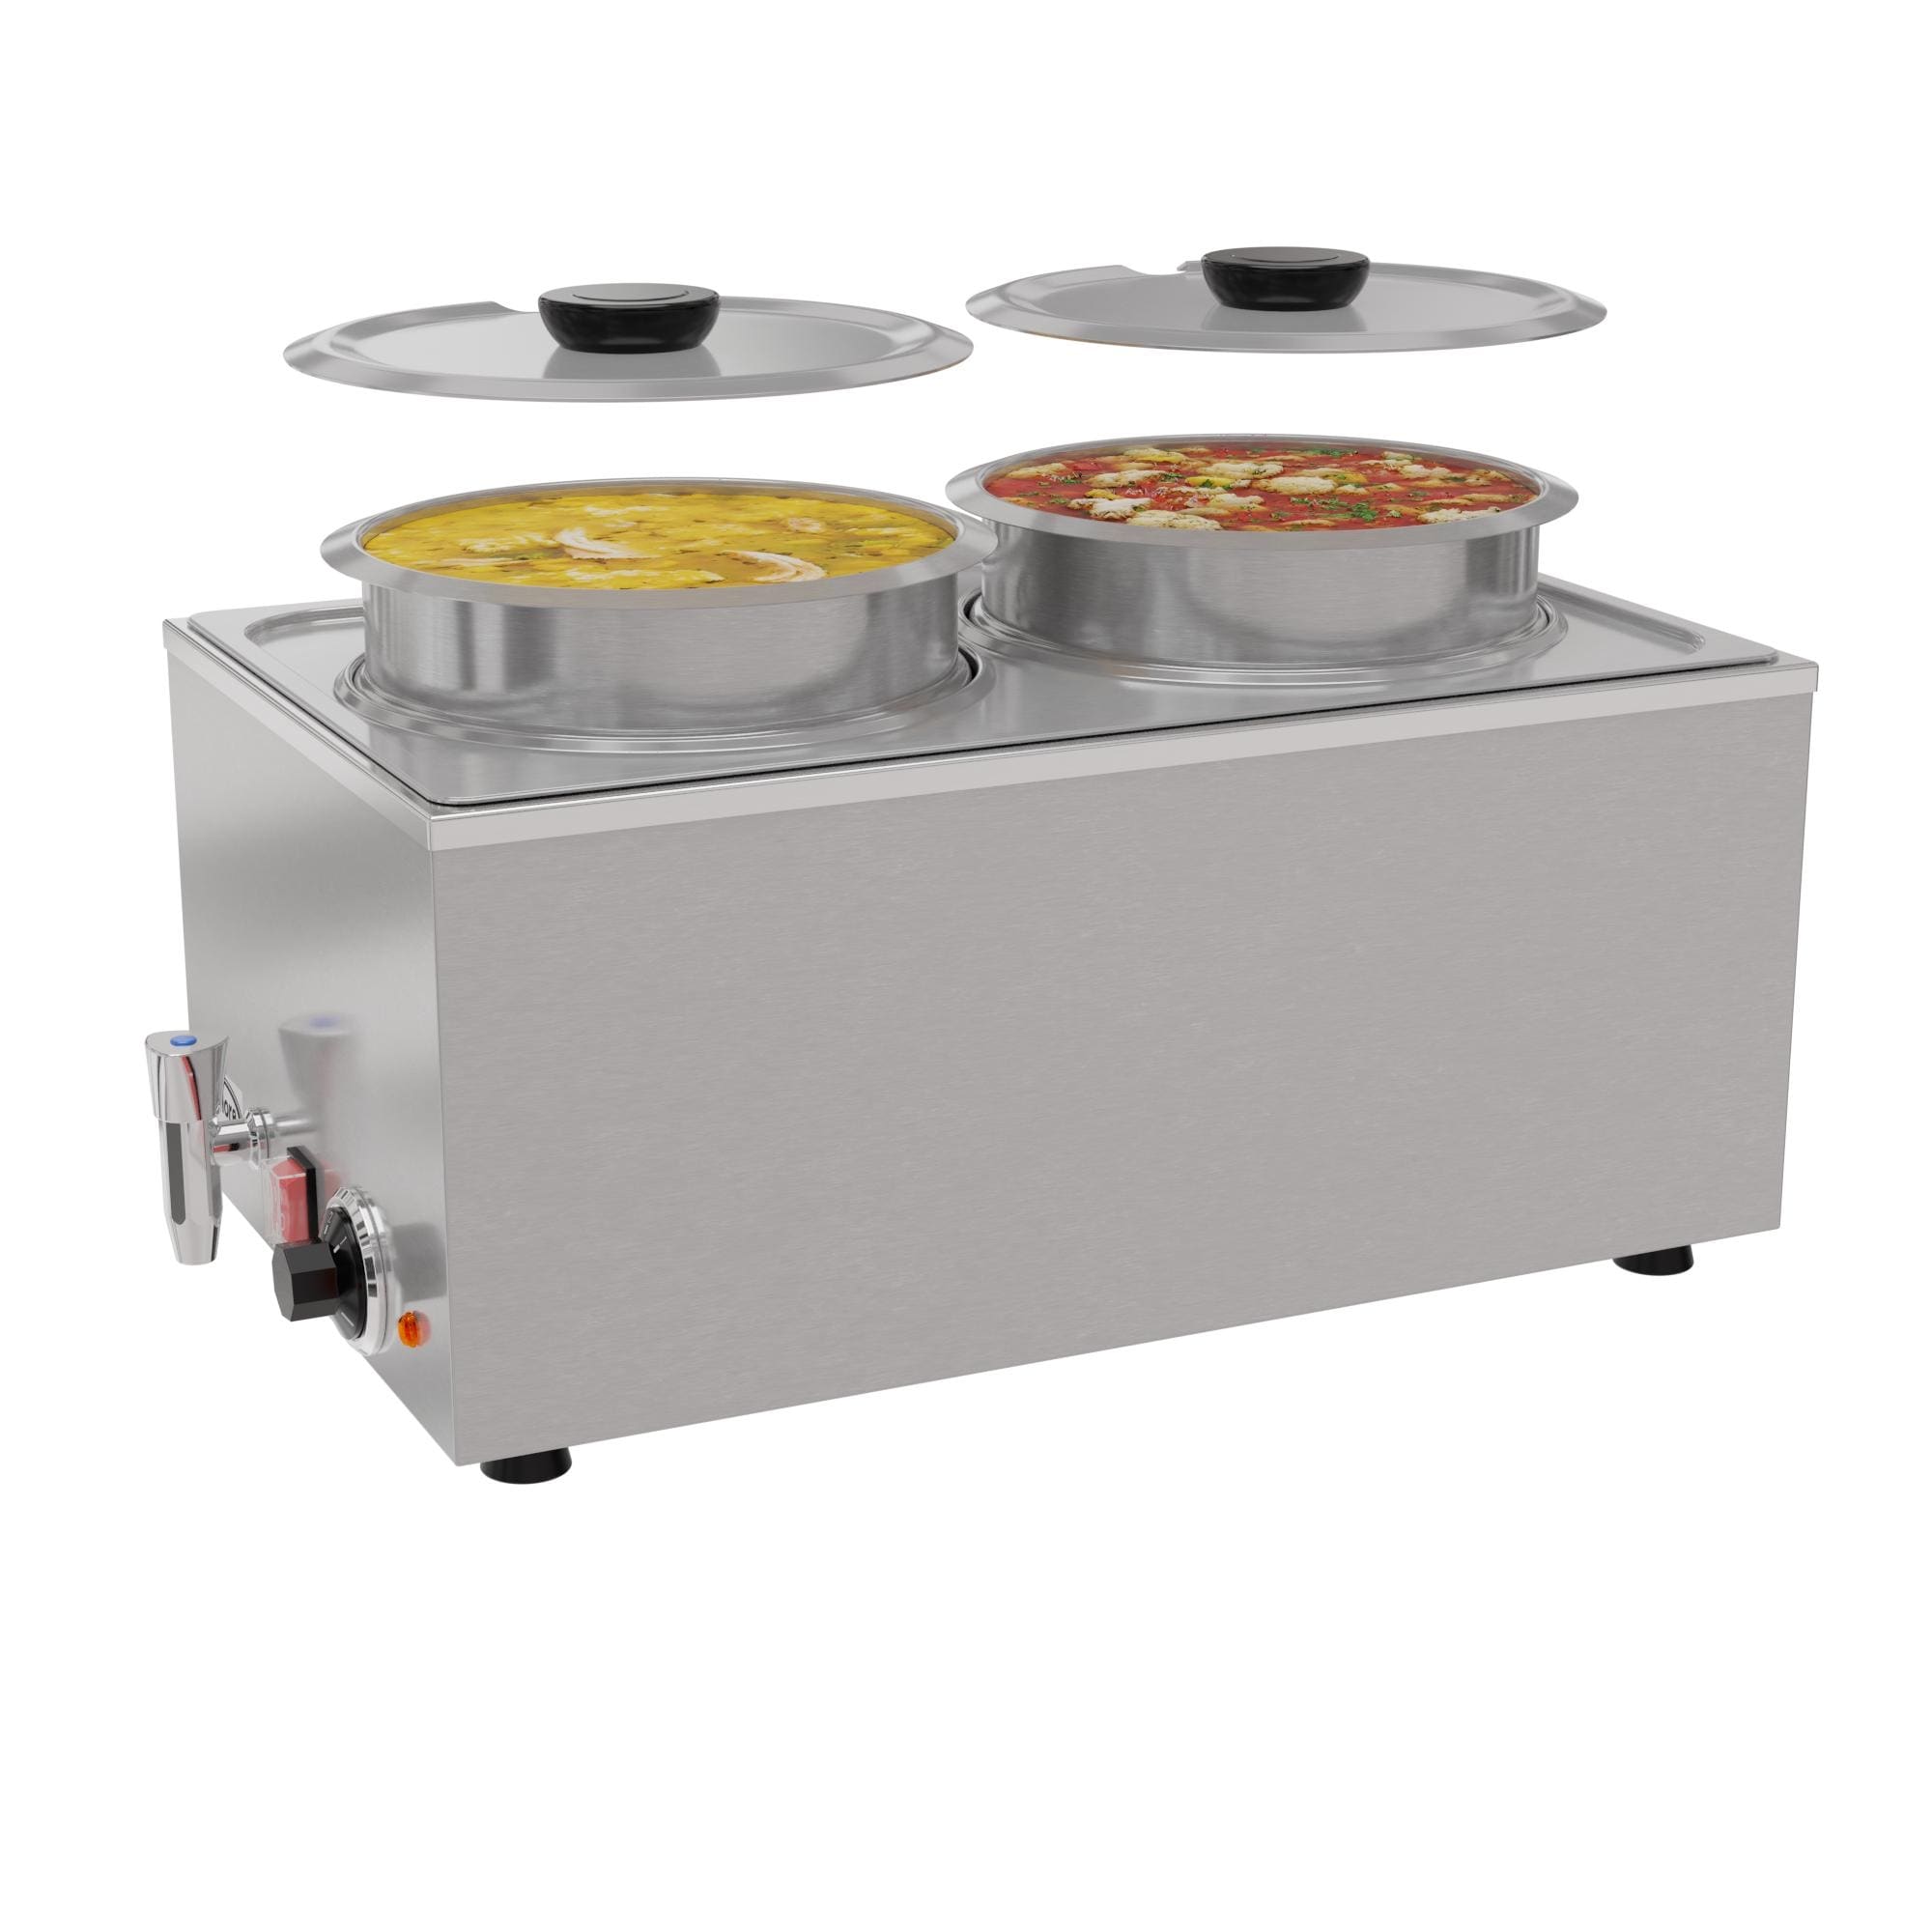 https://ak1.ostkcdn.com/images/products/is/images/direct/0c2c2e1682b332950144968b5ab9b51685a60249/8-Qt.-Stainless-Steel-Countertop-Food-Warmer-with-Faucet%2C-Soup-Station-and-Buffet-Table-with-Two-Serving-Sections.jpg